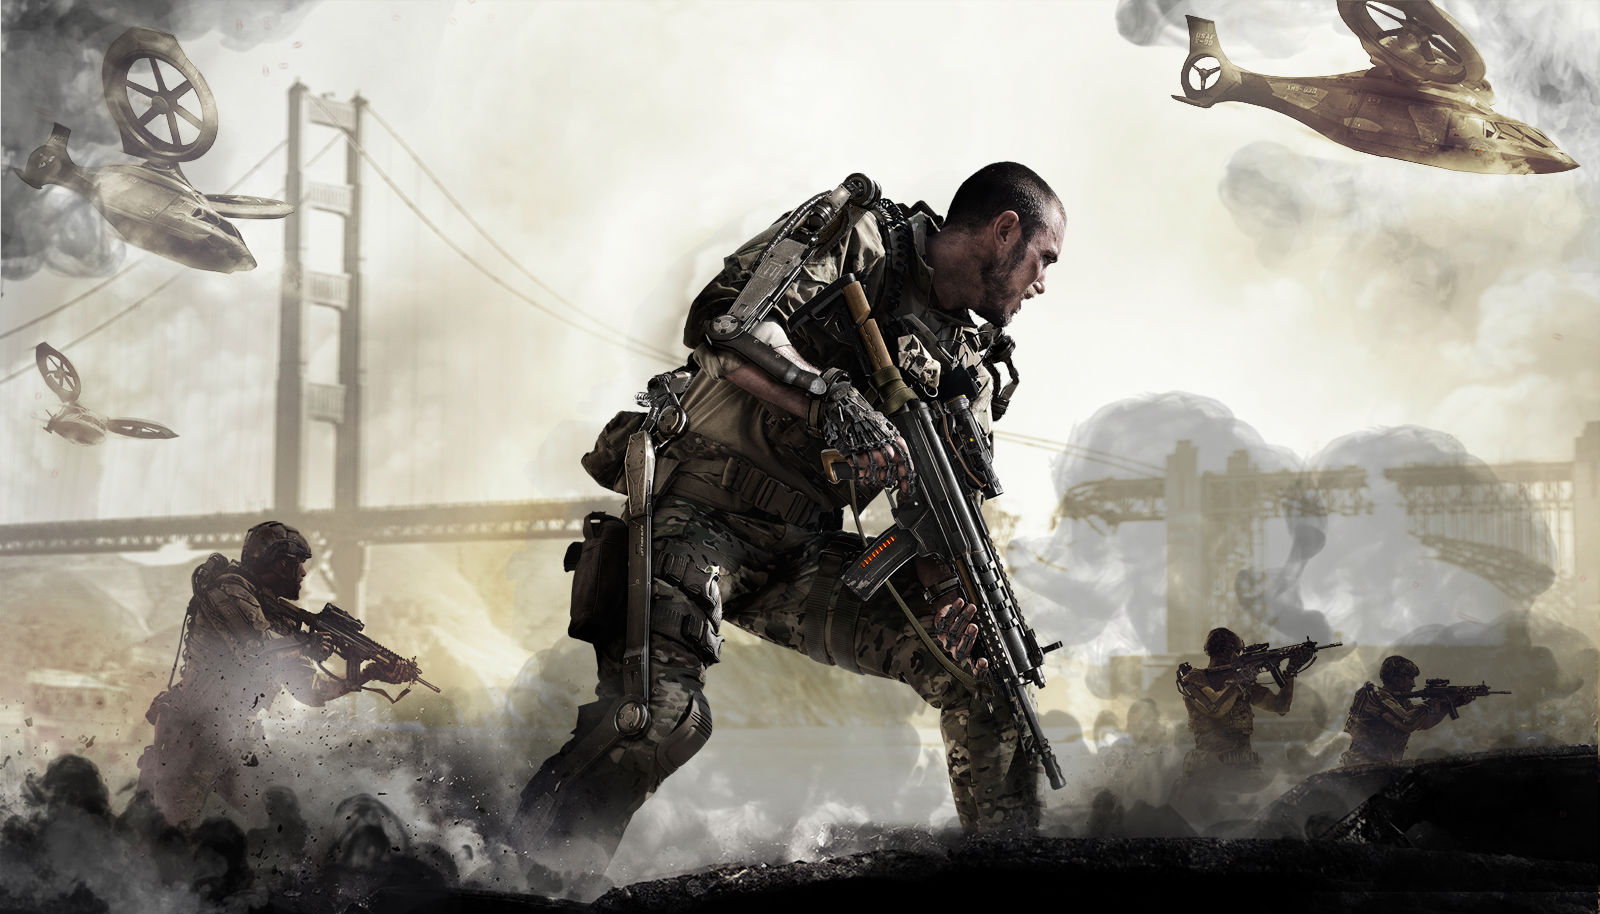 Promotional image from the 2014 from Call of Duty: Advanced Warfare